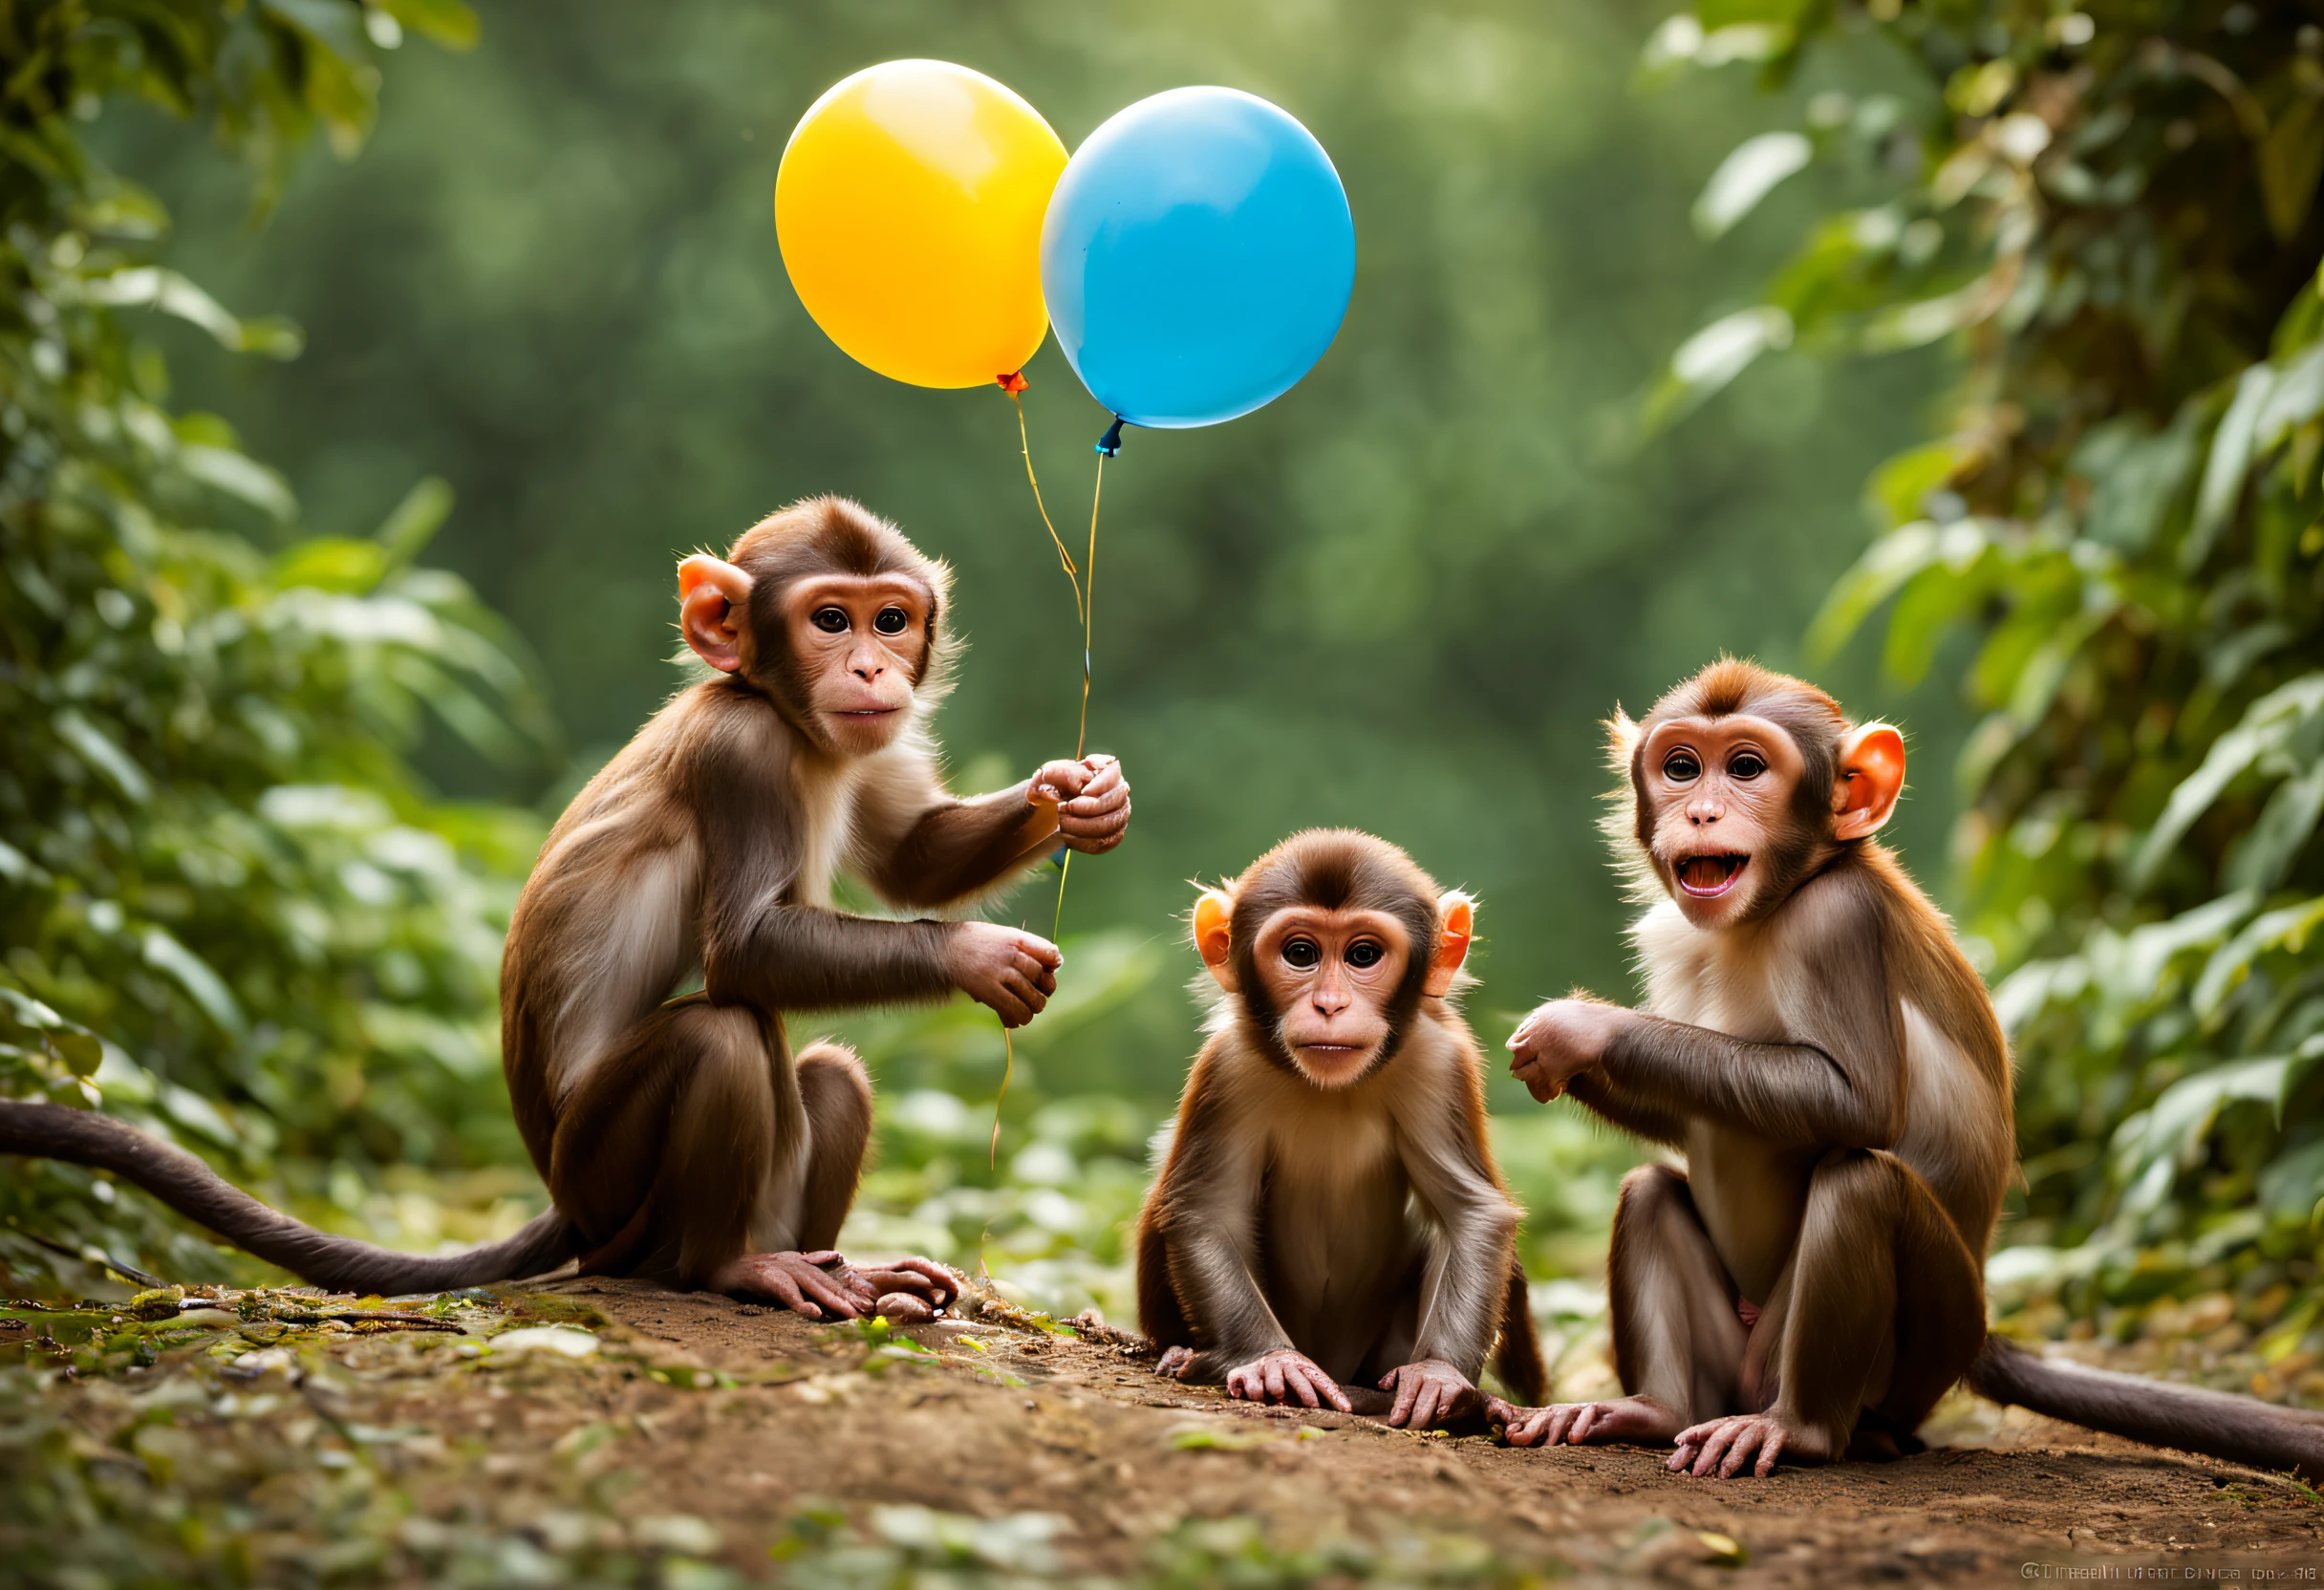 "(best quality,ultra-detailed),a group of monkeys playing with balloons,fun,joy,curious monkeys,energetic monkeys,playful monkeys,forest background,colorful balloons,cheerful atmosphere,vivid colors,expressive faces,fluffy fur,mischievous expressions,monkey antics,happy moments,monkey's natural habitat,wildlife photography,action shots,monkey family,monkey siblings,emotions,interactive play,excitement,animal behavior,delightful scene,bokeh lights,beautiful nature,leafy trees,sunlit forest,playtime,active imaginations,fun-filled environment,uplifting vibes,movement,leaping monkeys,balloon popping,mischief,monkey business,imaginative play,innocence,laughter and joy"